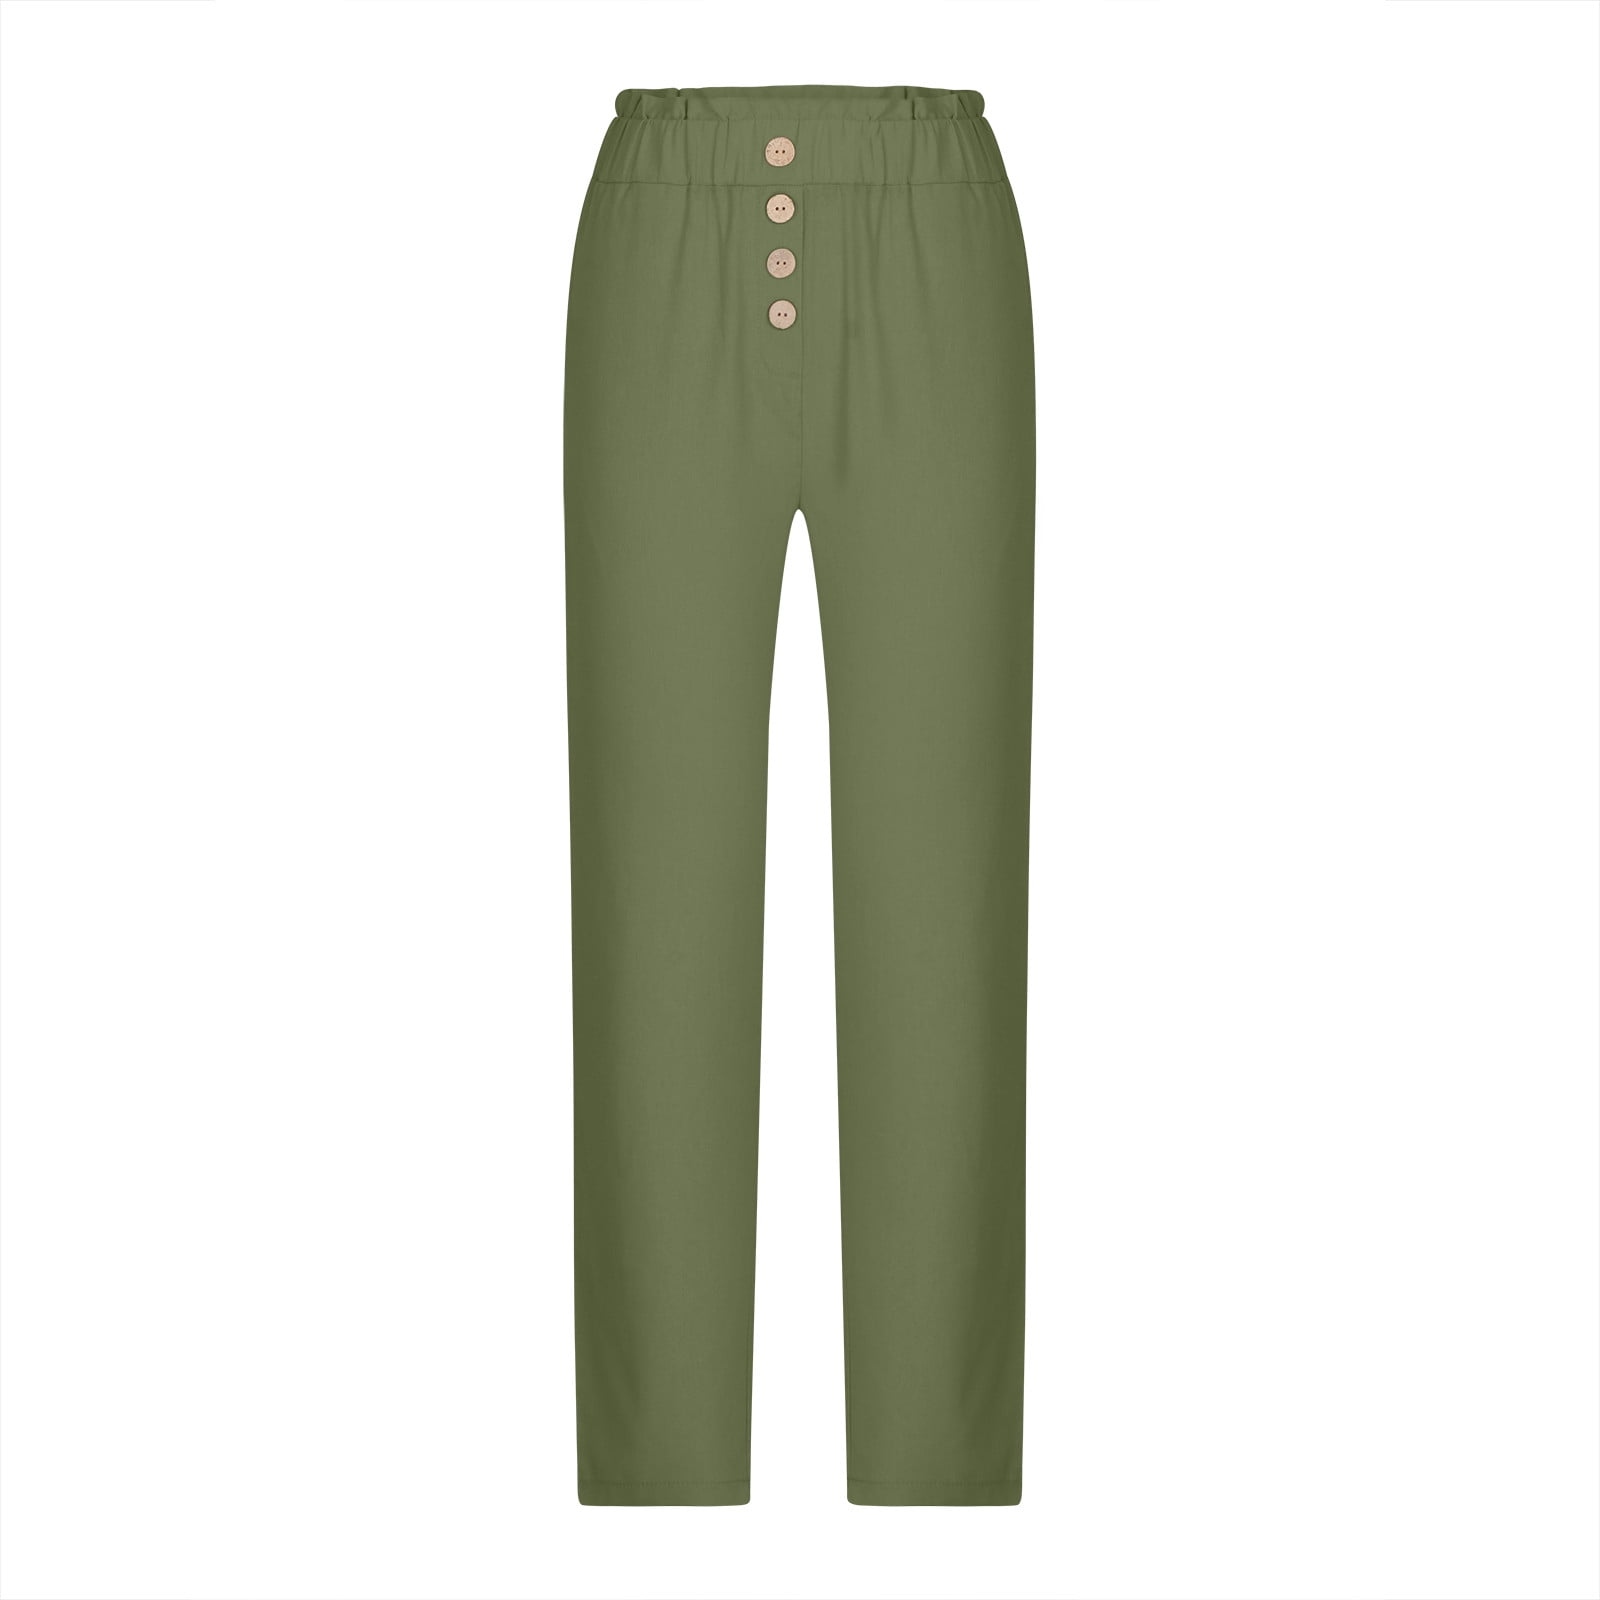 Xihbxyly Linen Pants for Women Womens Pants Cotton Linen Long Lounge Pants  Drawstring Back Elastic Waist Pants Casual Trousers with Pockets, Green, L